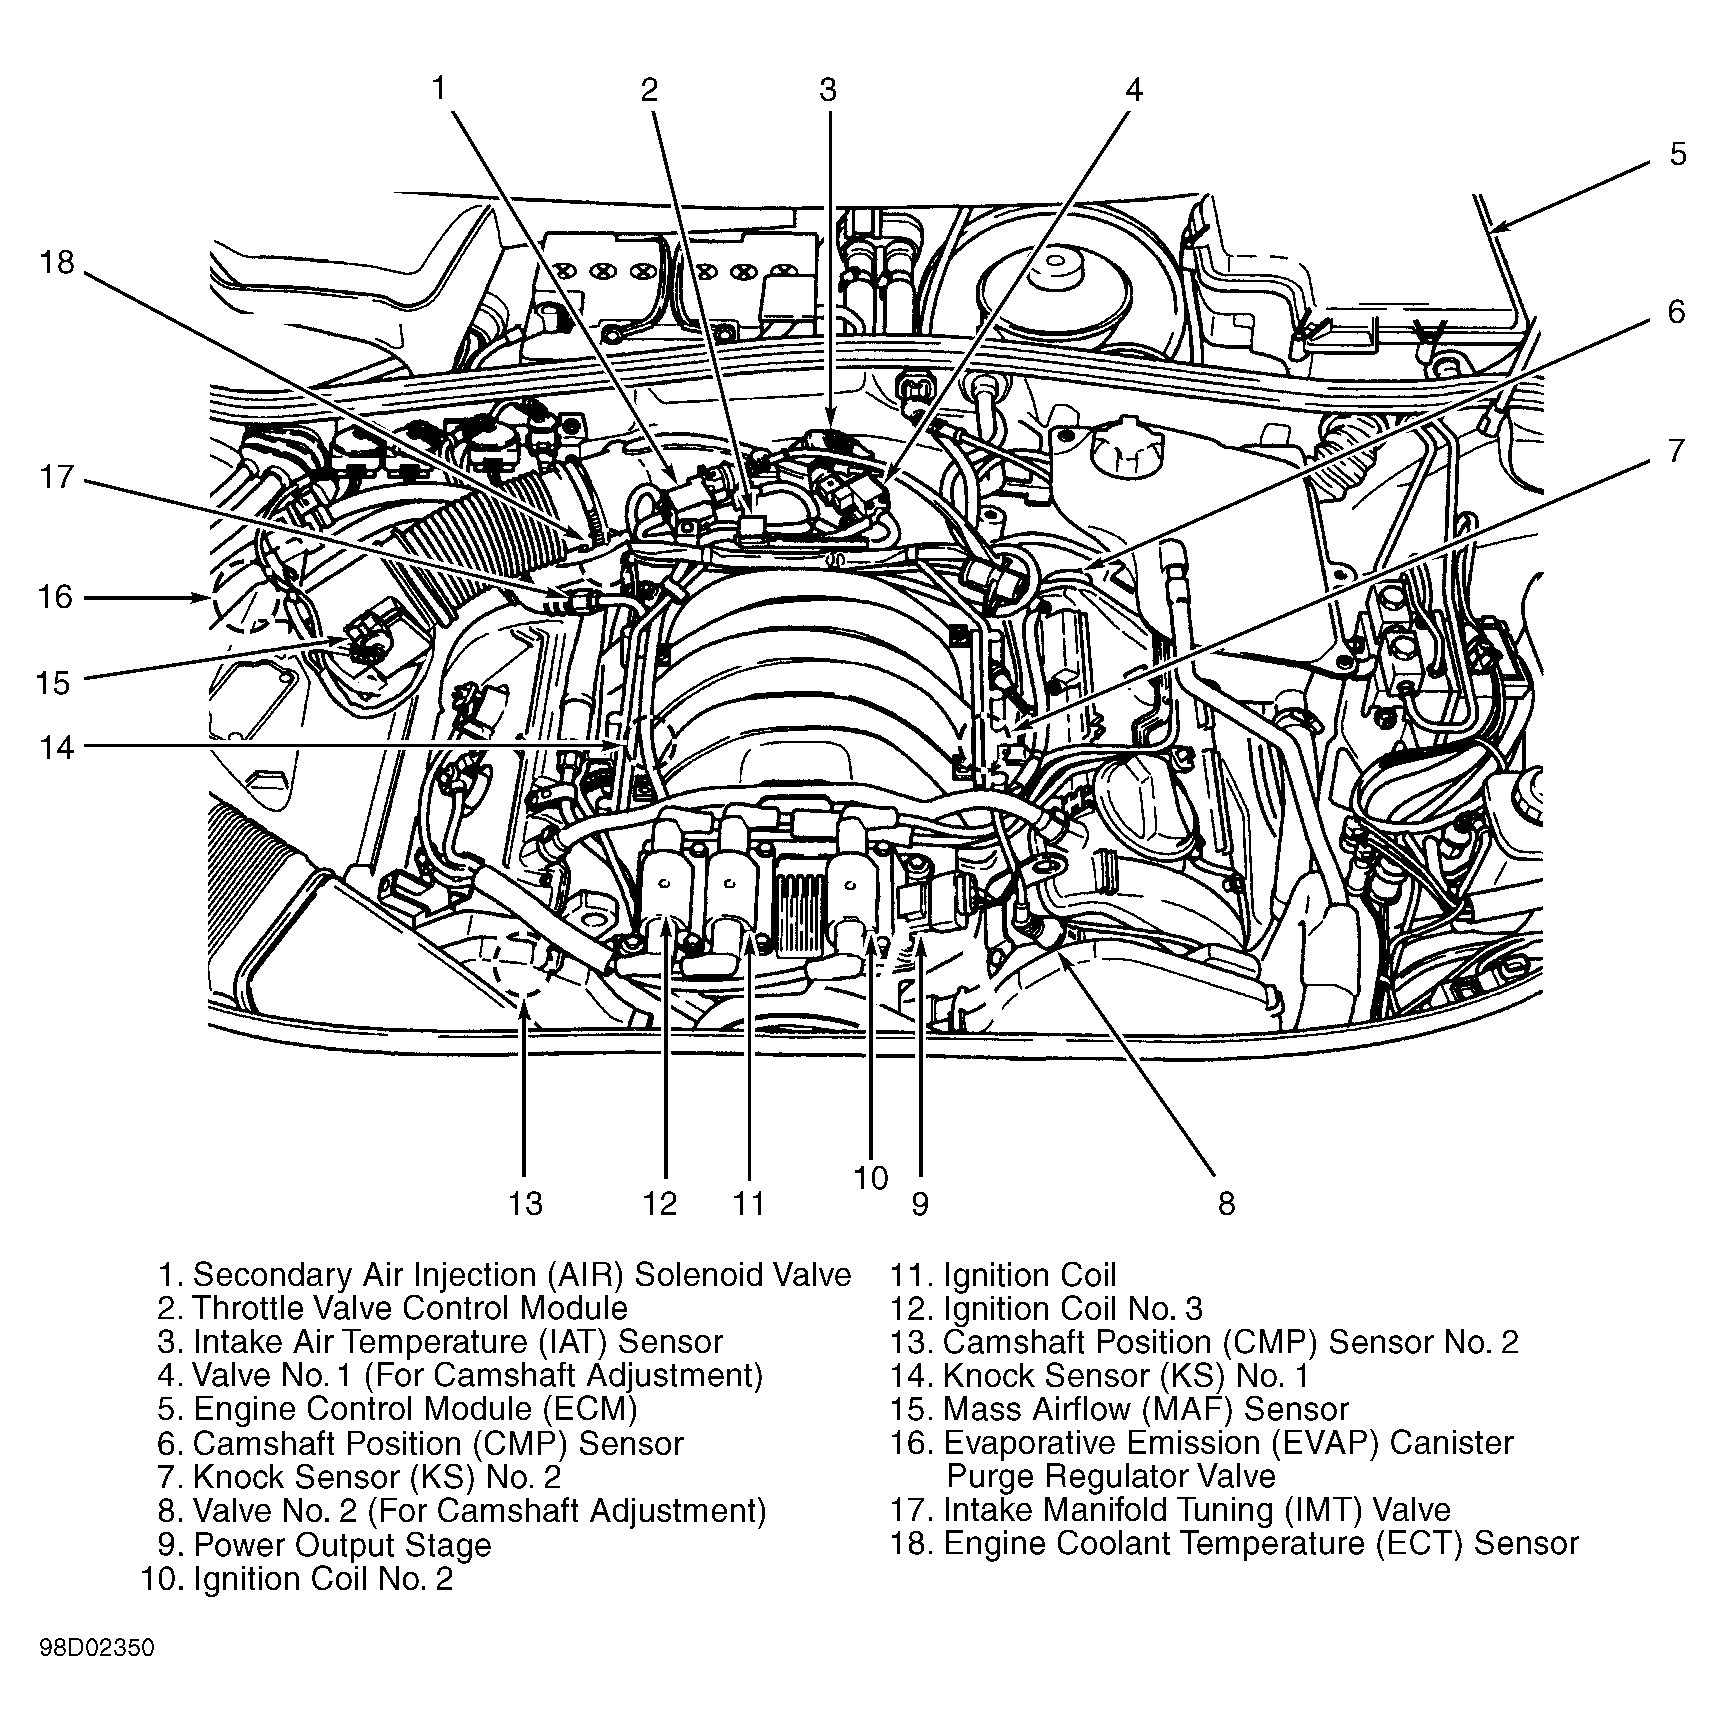 A0Bb54 2007 Ford 3 0 V6 Engine Diagram | Wiring Resources